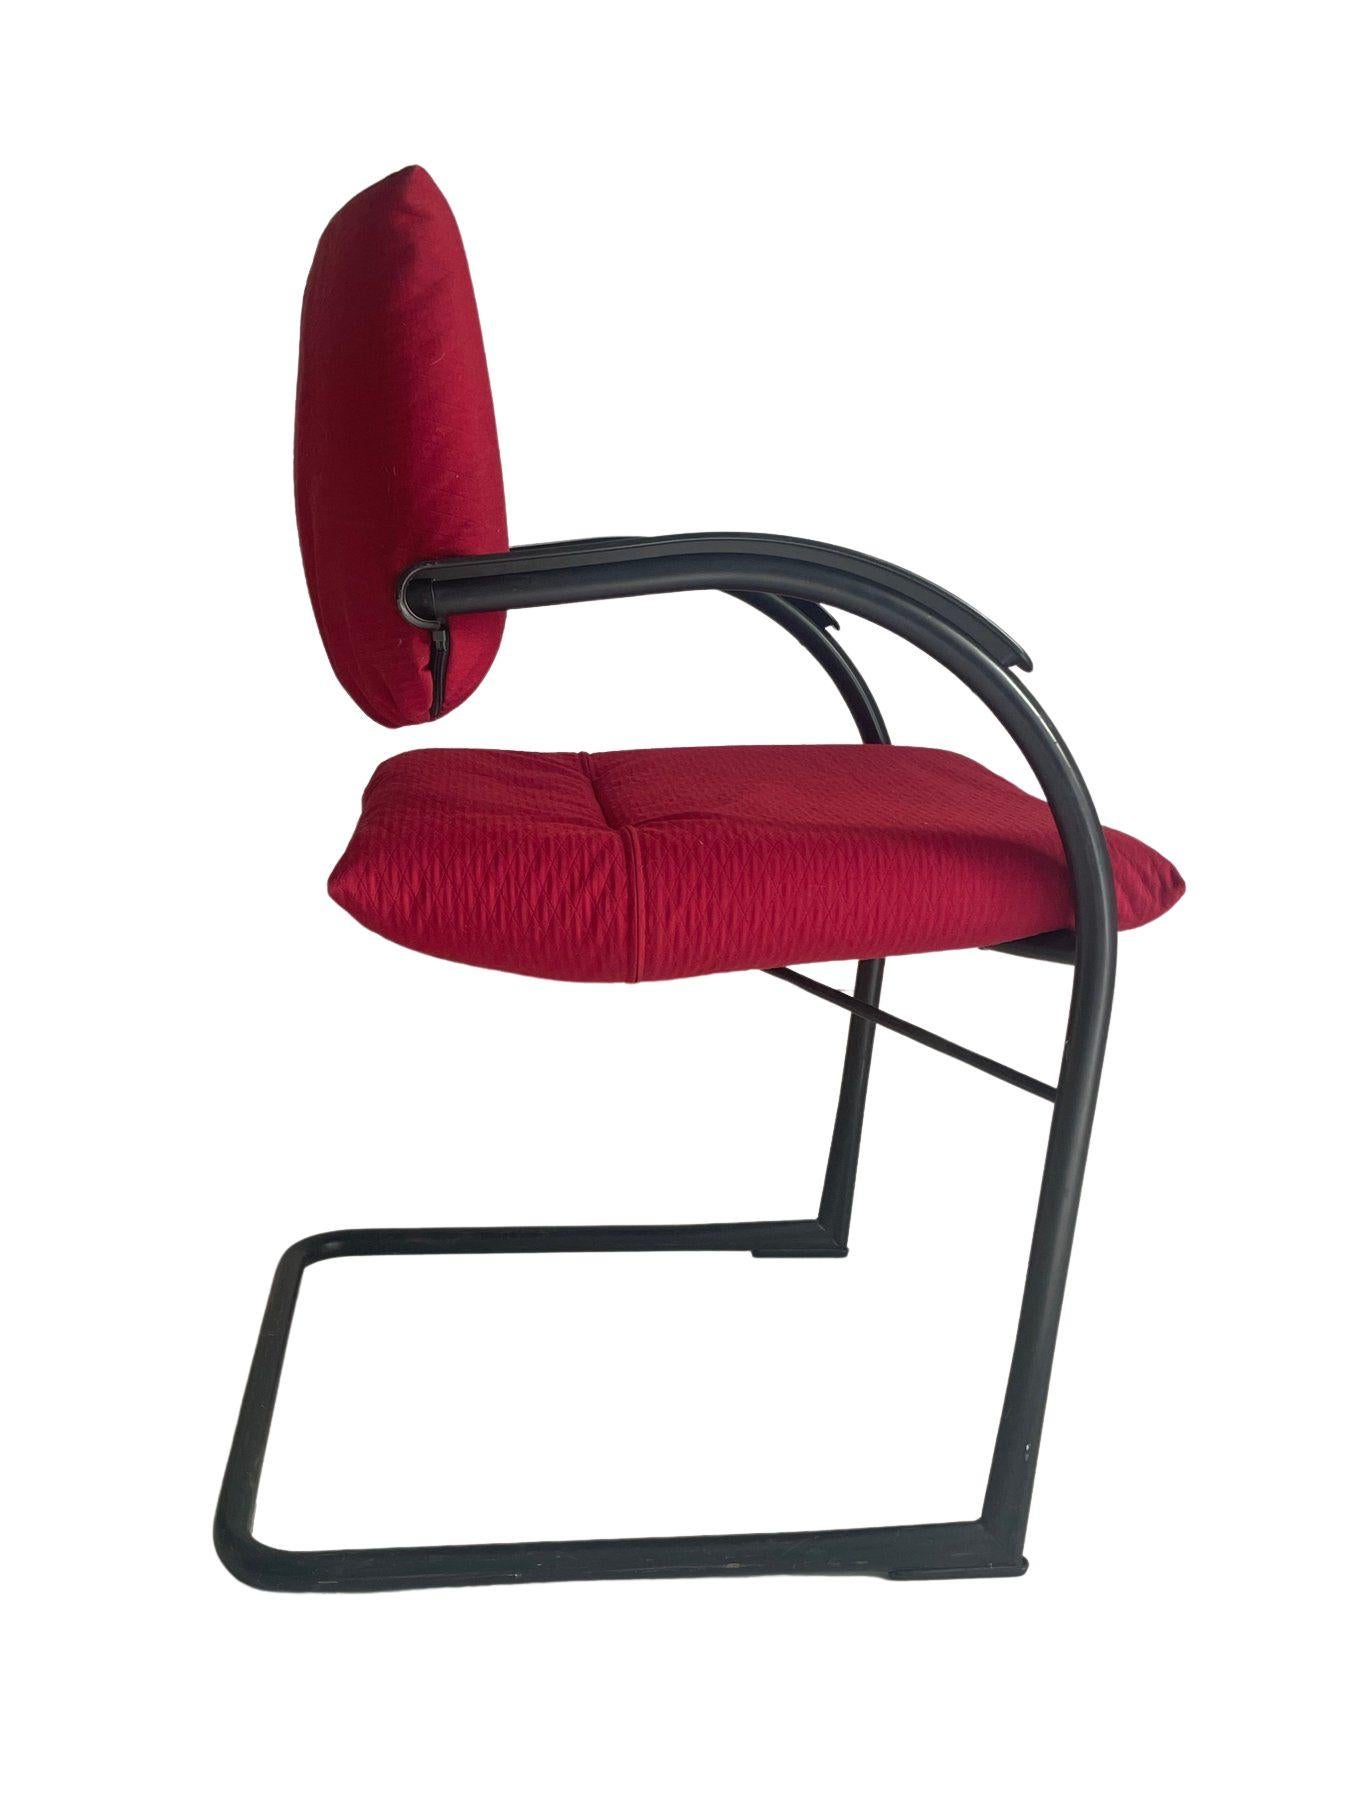 vitra cantilever chair